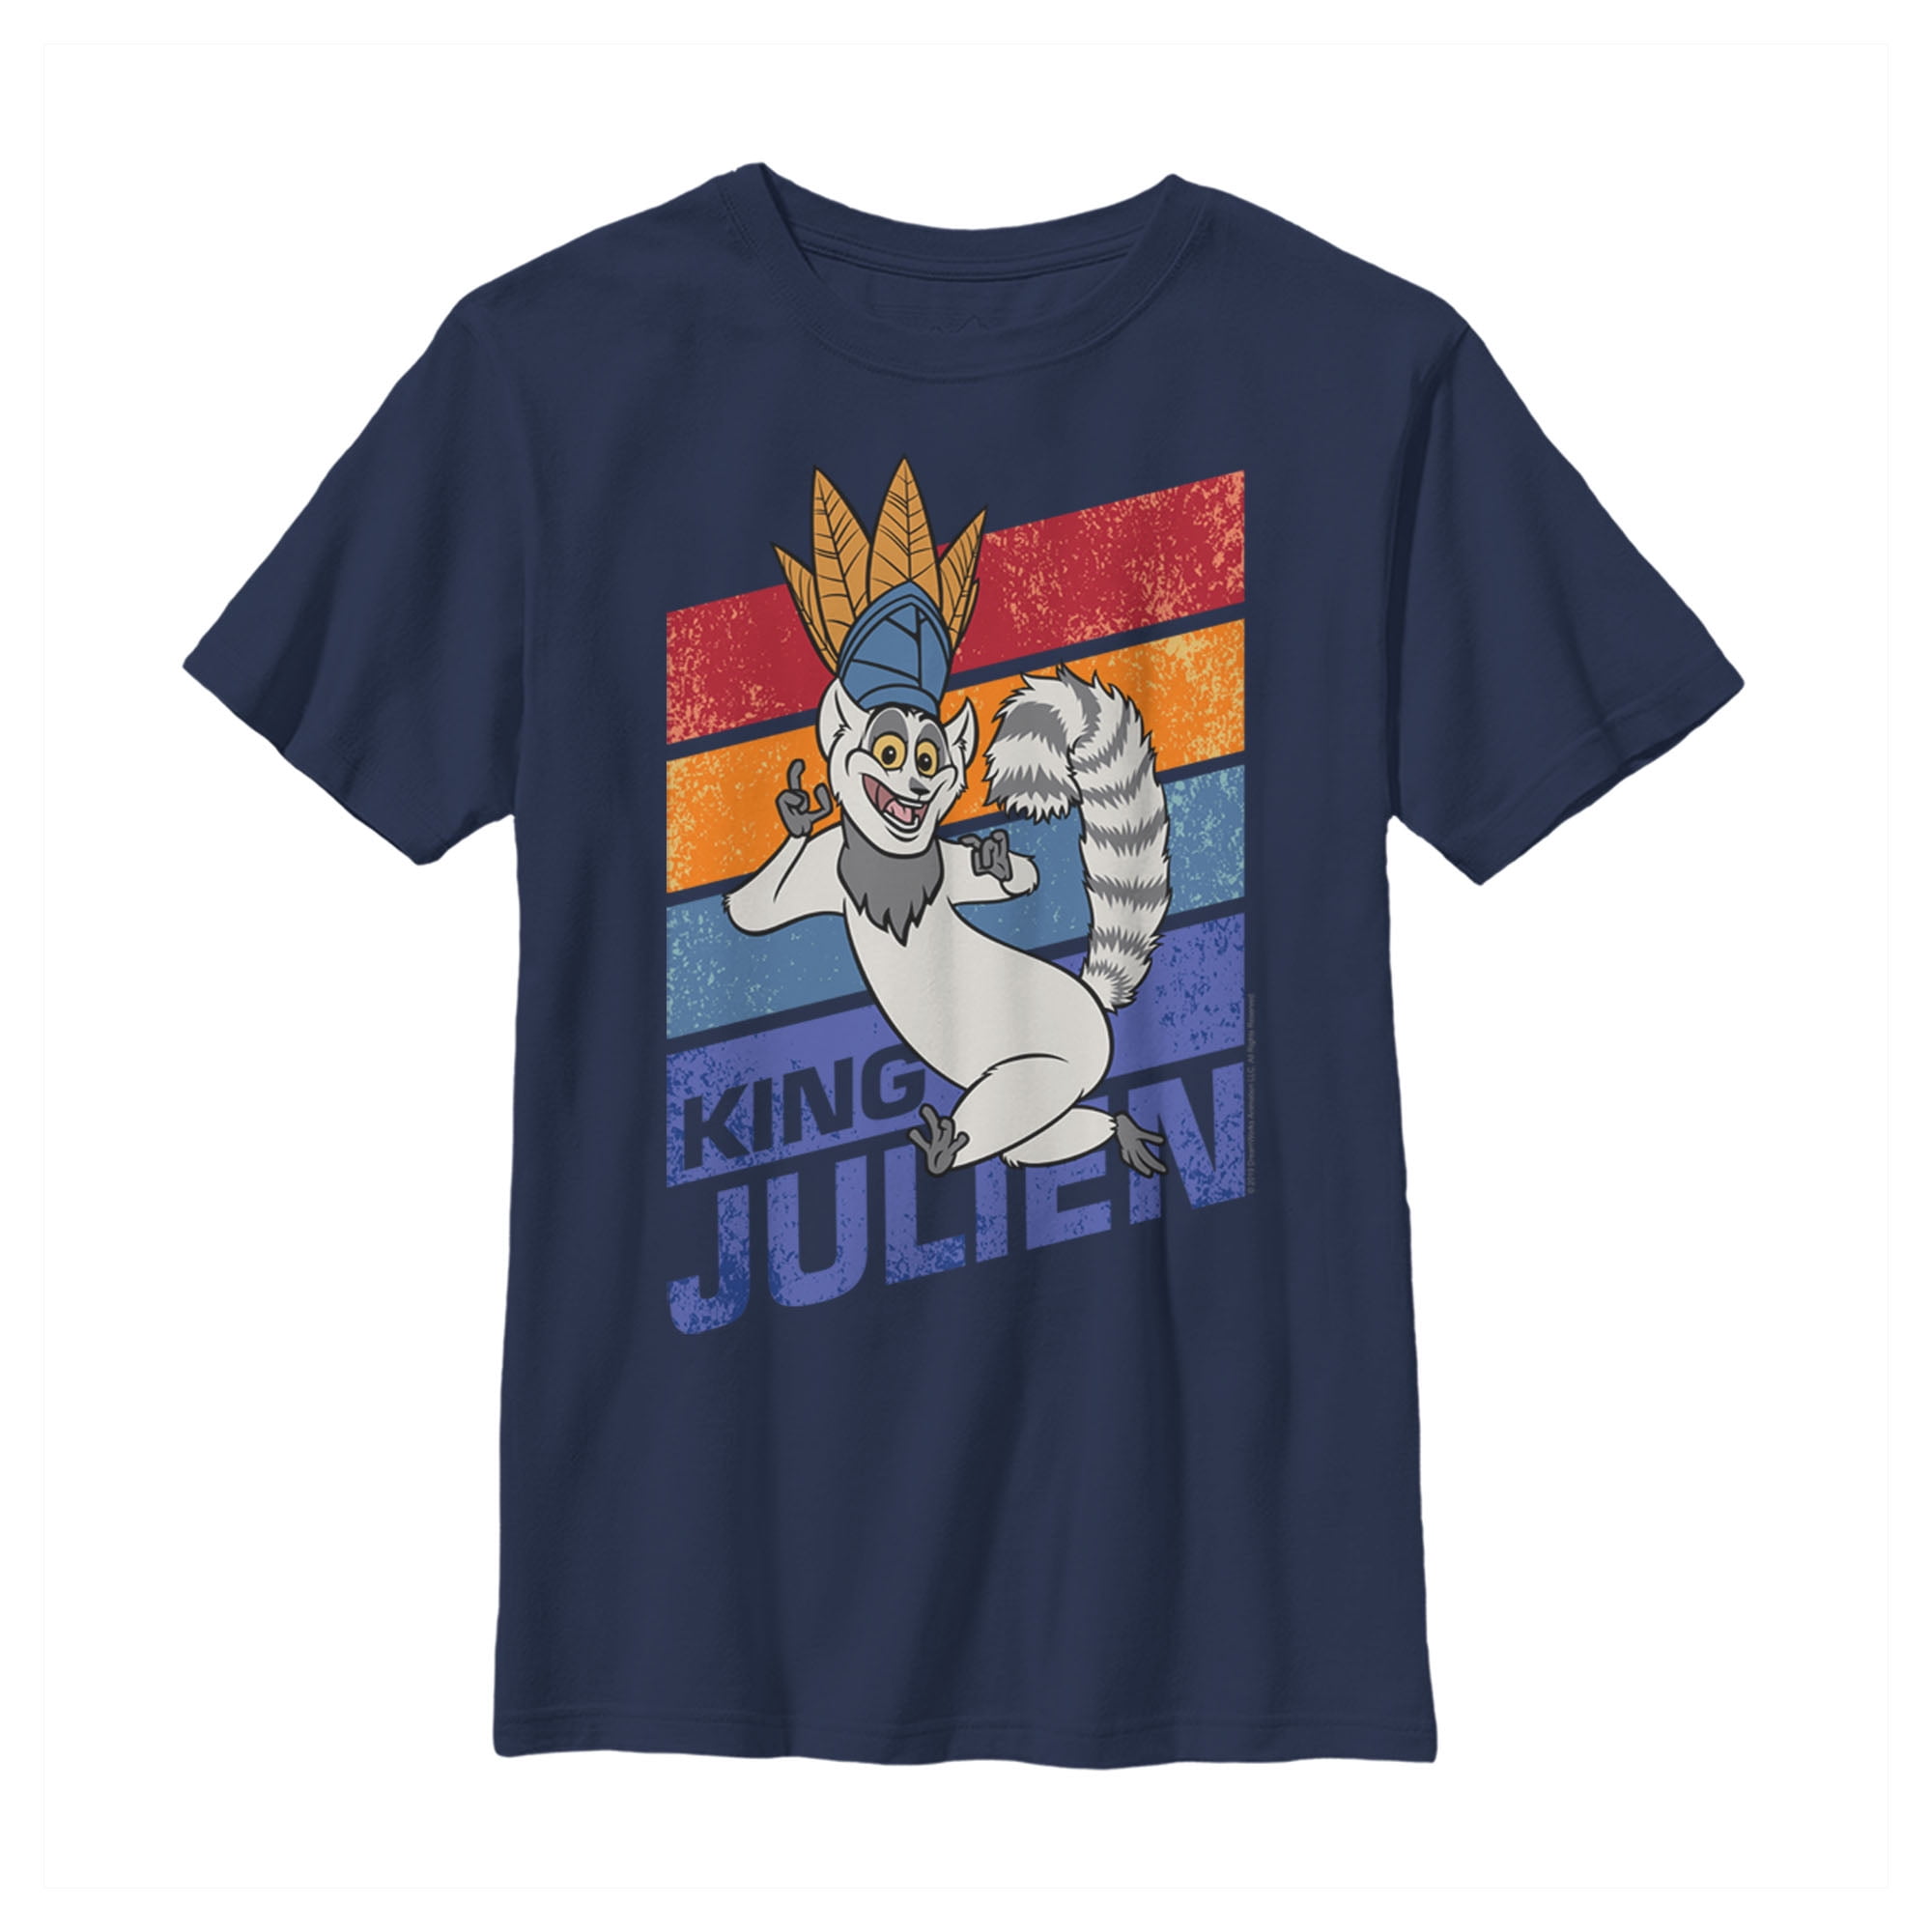 Boy's Madagascar King Julien Graphic Tee Navy Blue Small 